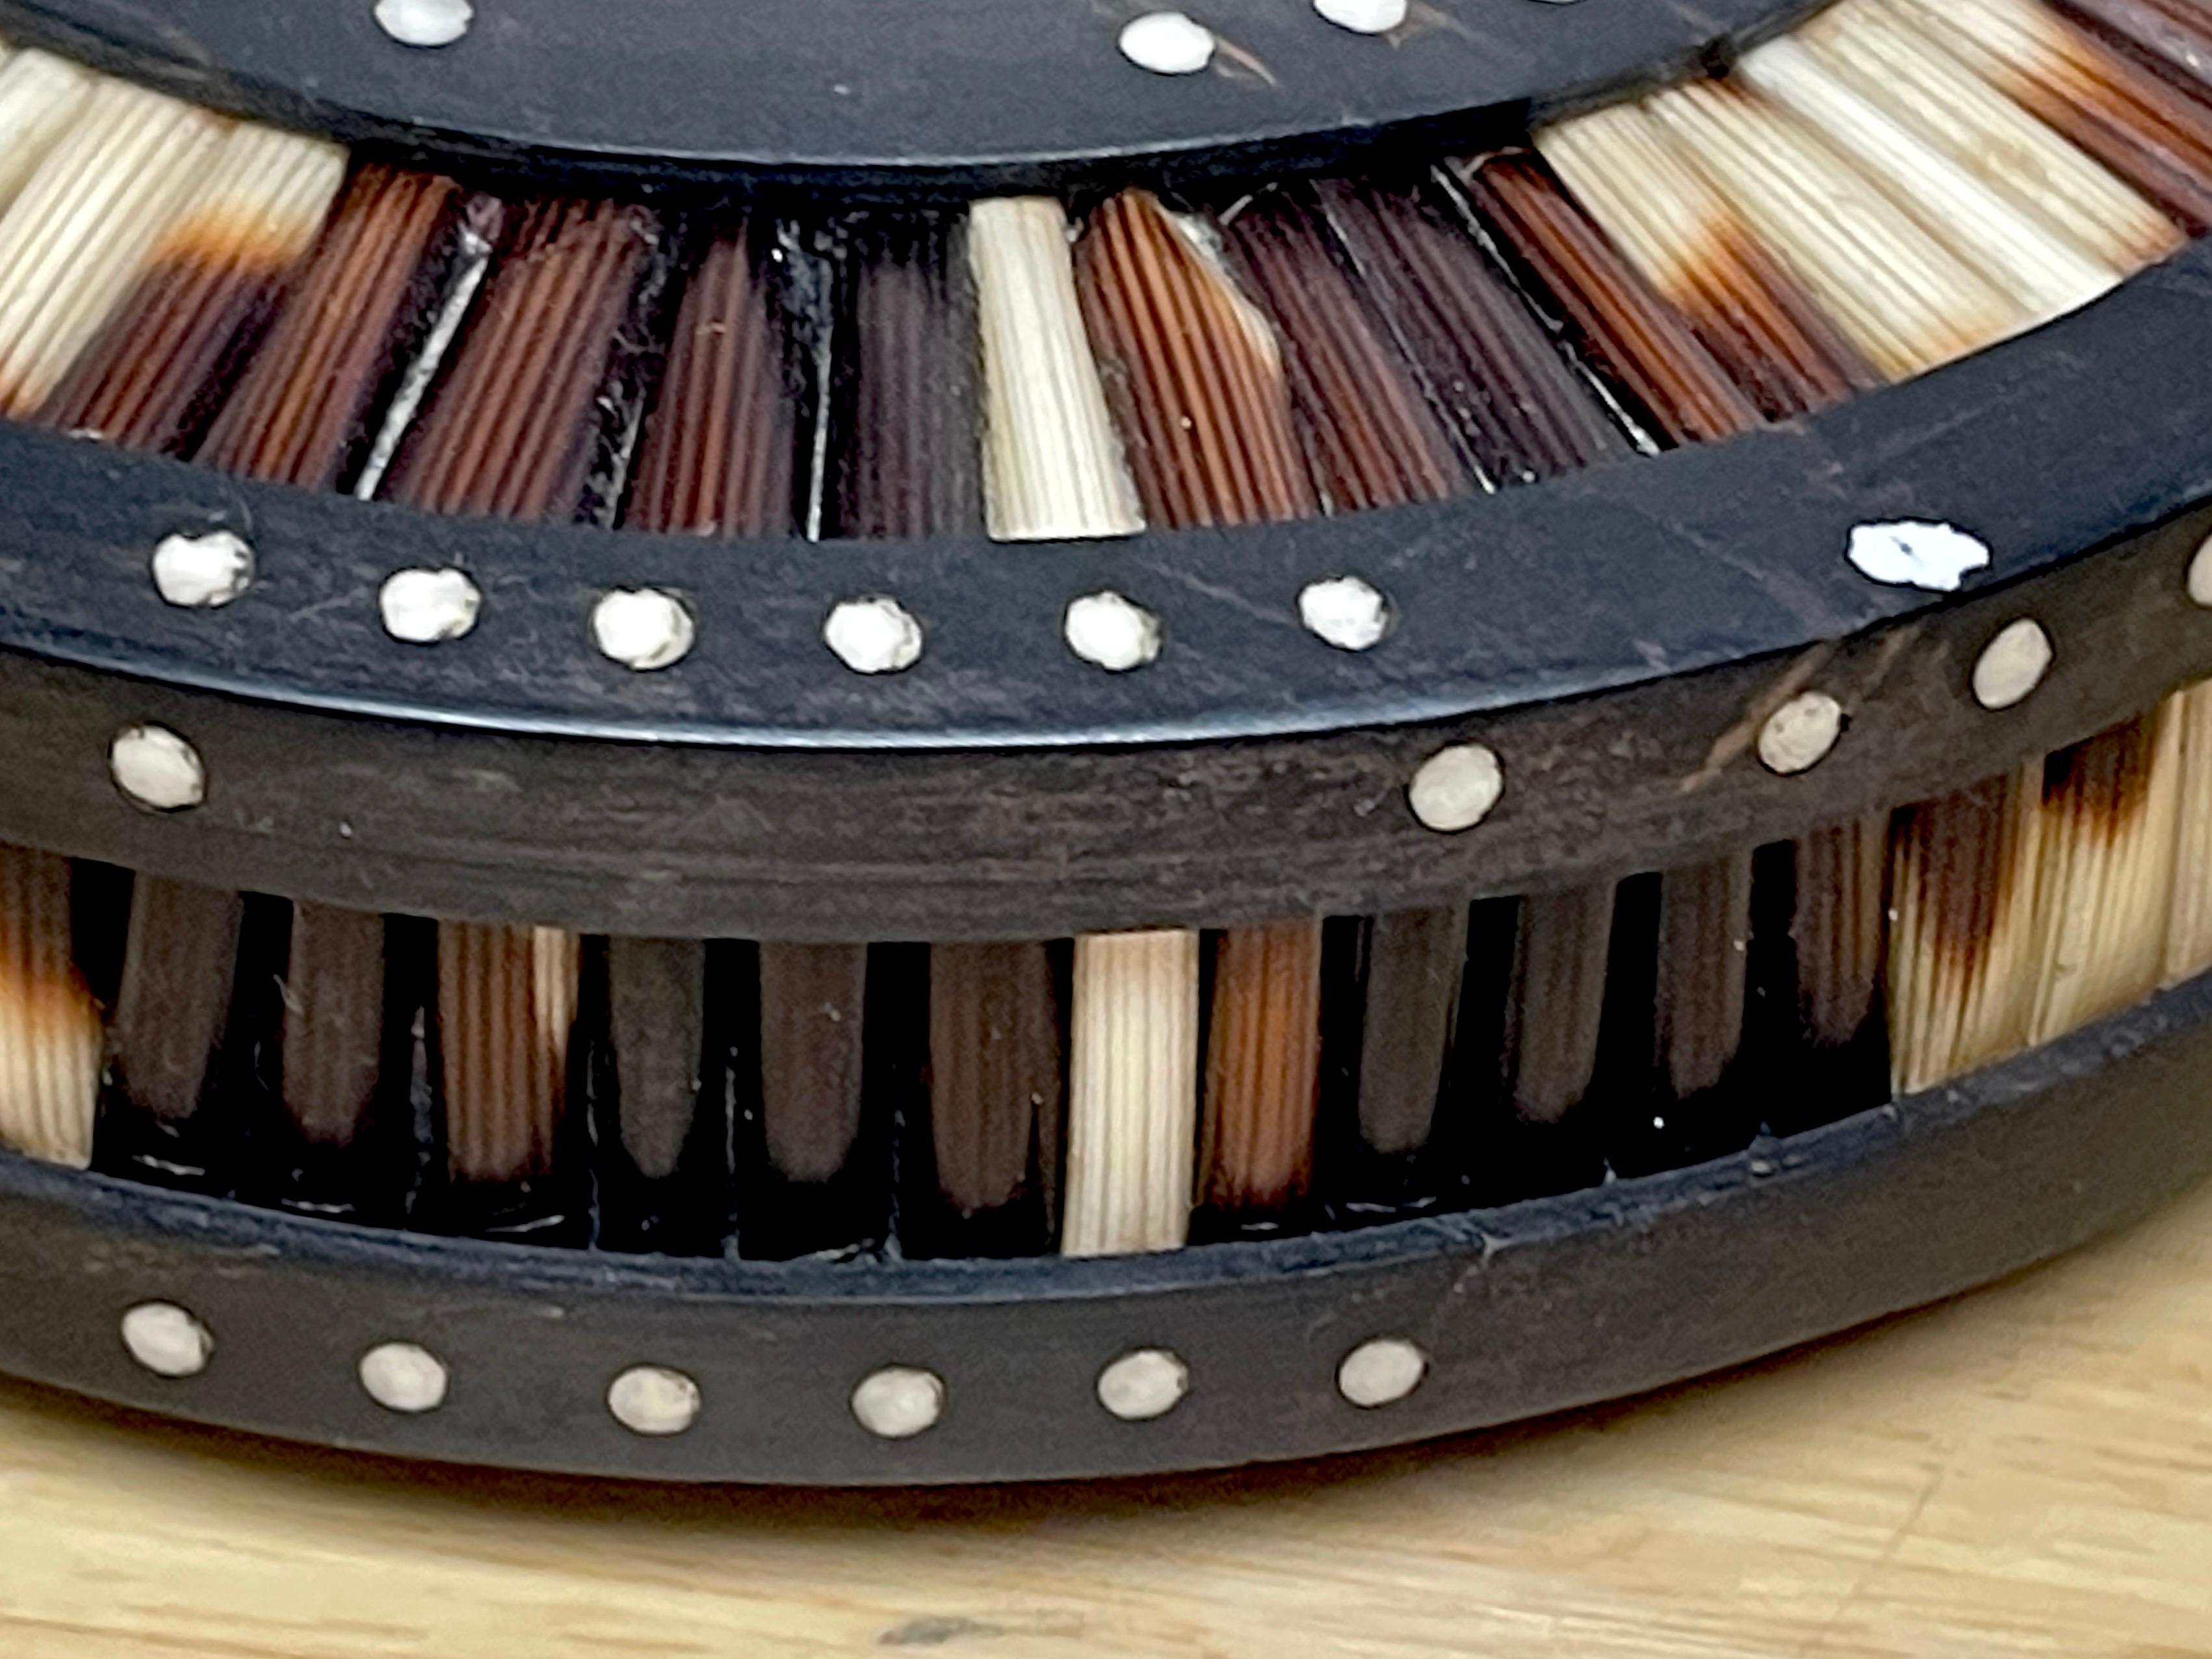 Anglo, Indian Ebony & Porcupine Quill Inlaid Vide-Poche In Good Condition For Sale In West Palm Beach, FL